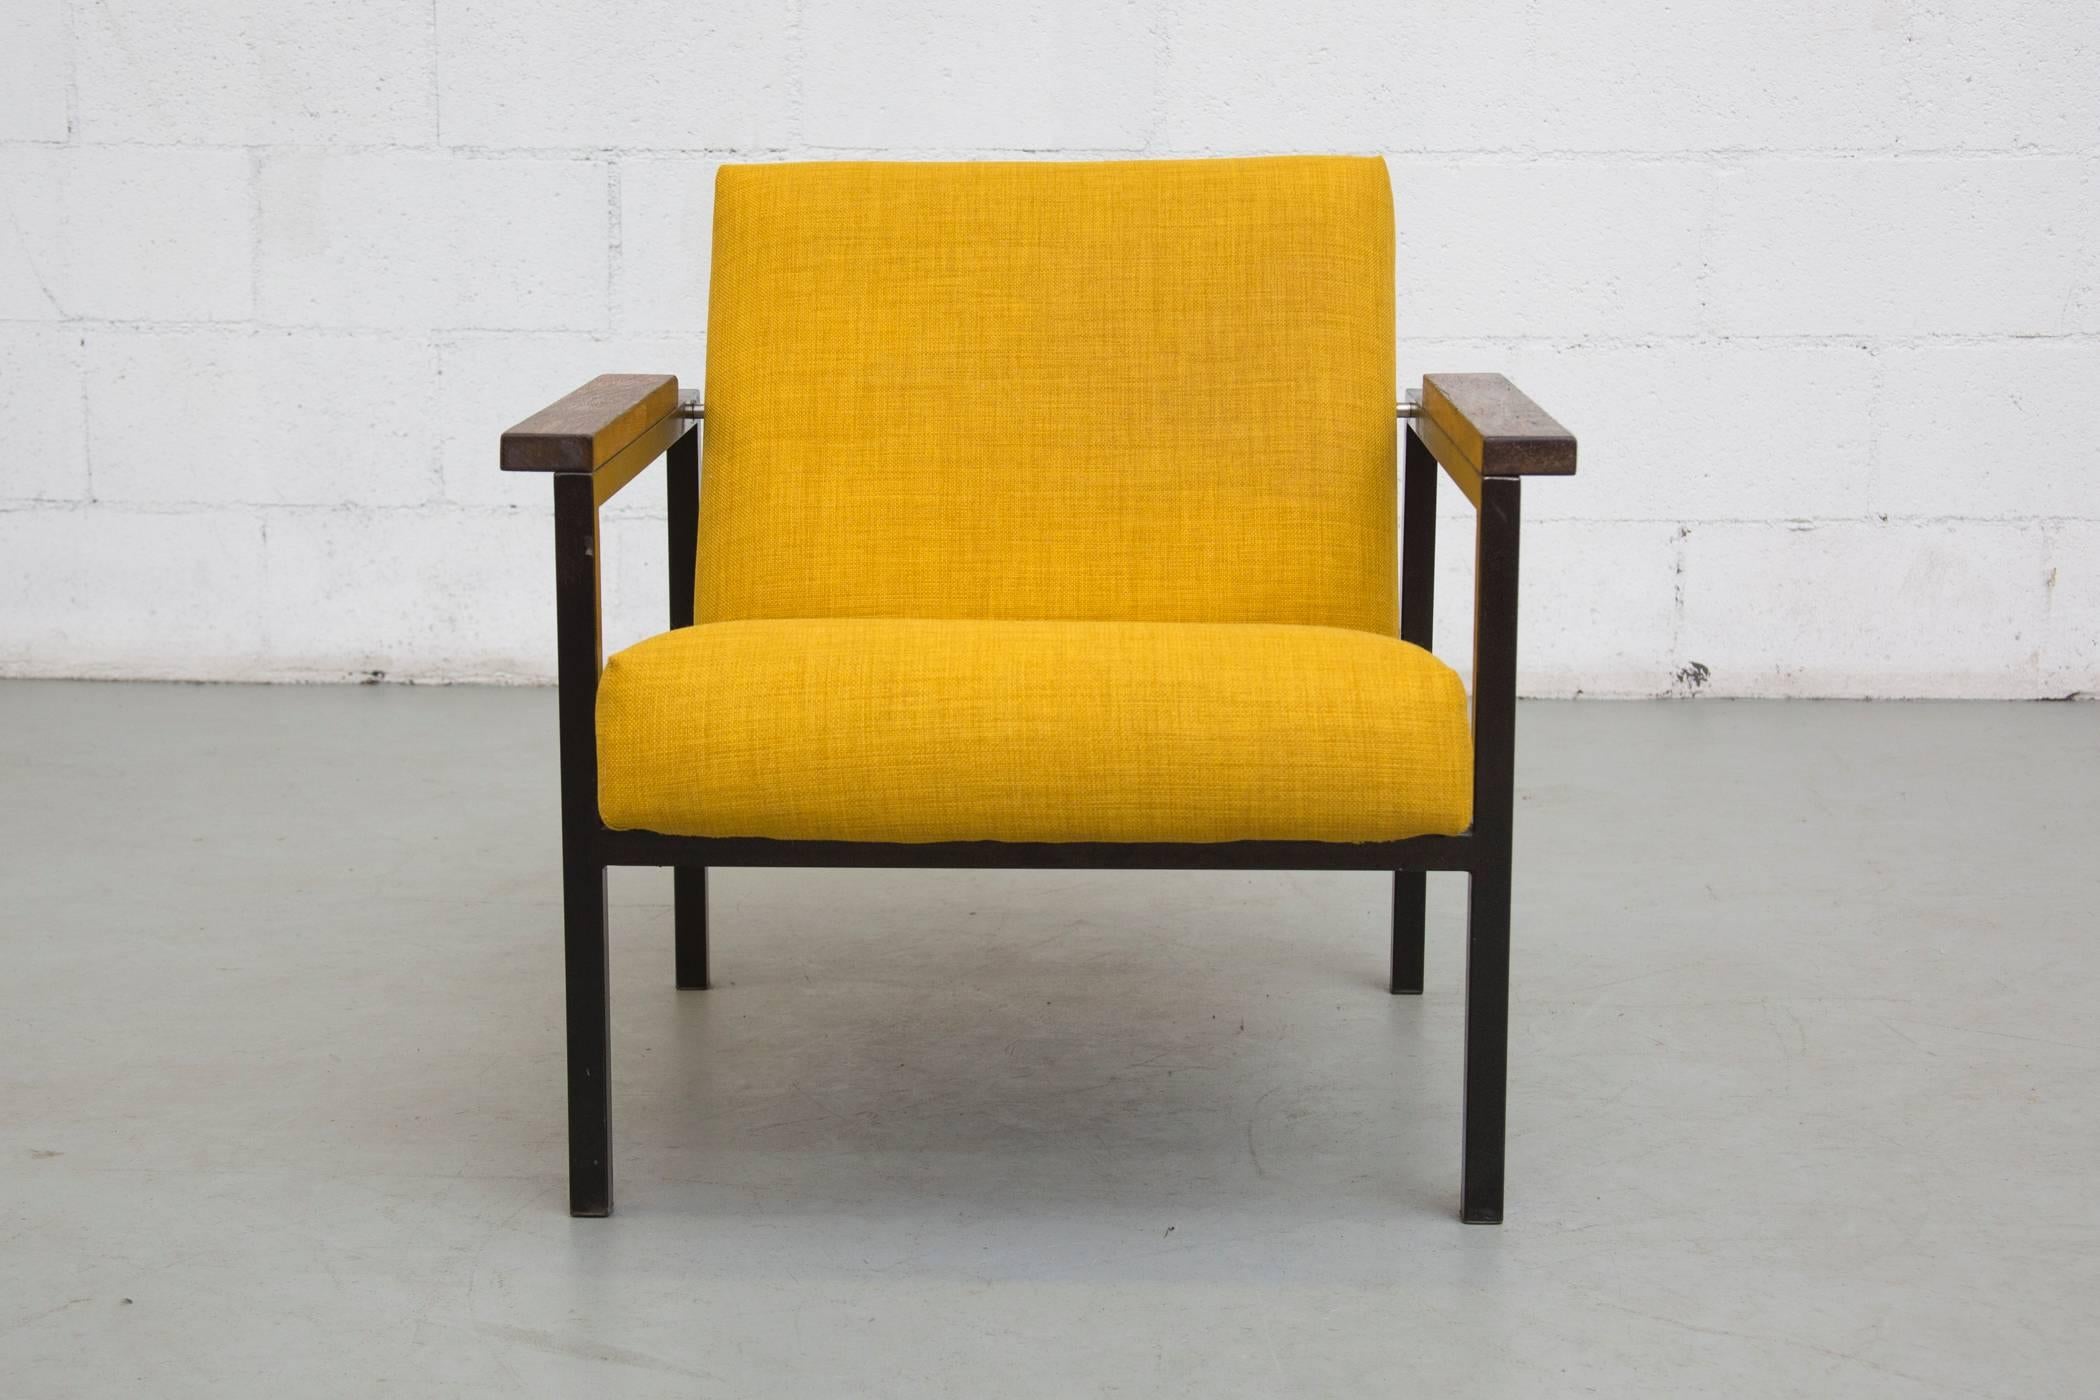 Swanky newly upholstered mustard yellow lounge chair with black enameled metal frame and wenge armrests. Frame and armrests in original condition